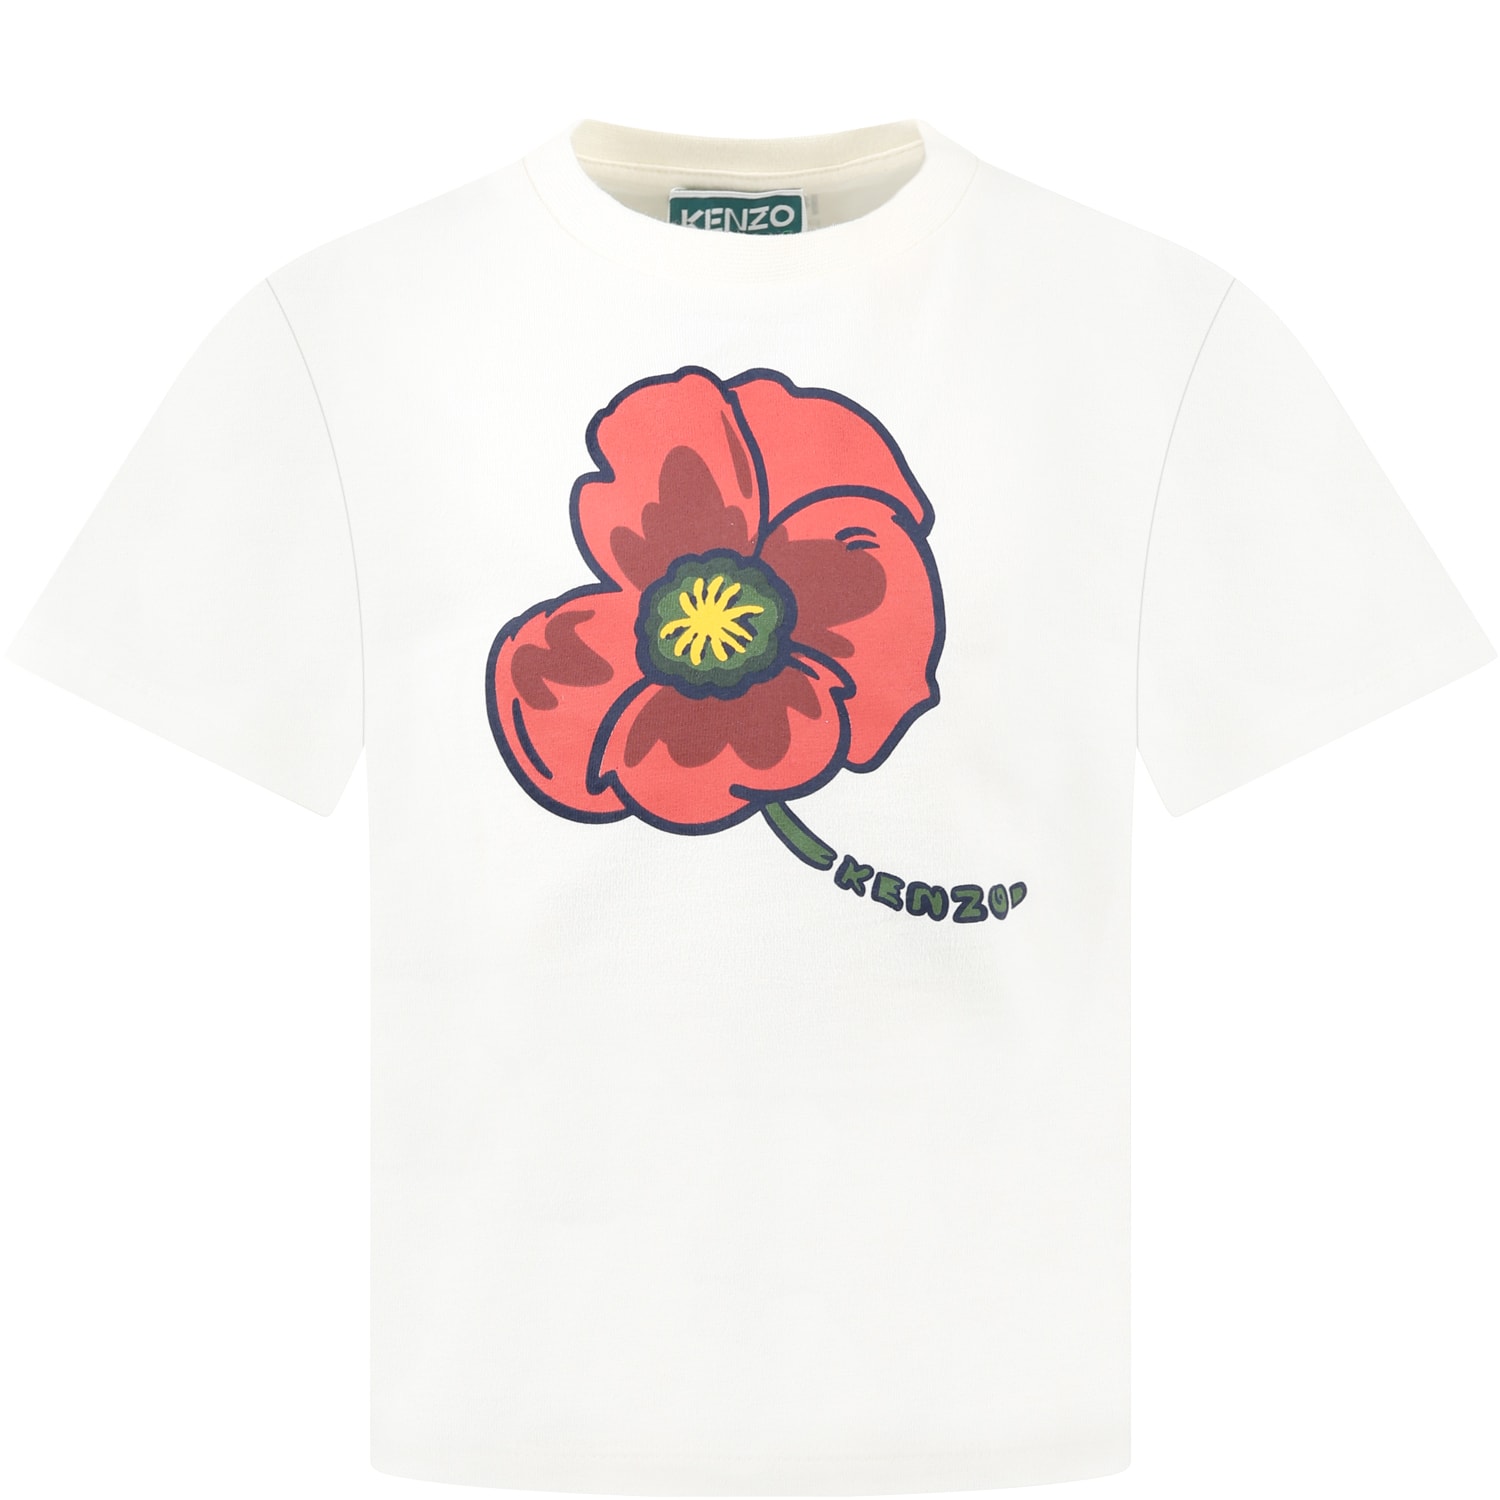 KENZO WHITE T-SHIRT FOR GIRL WITH ICONIC RED POPPY AND LOGO